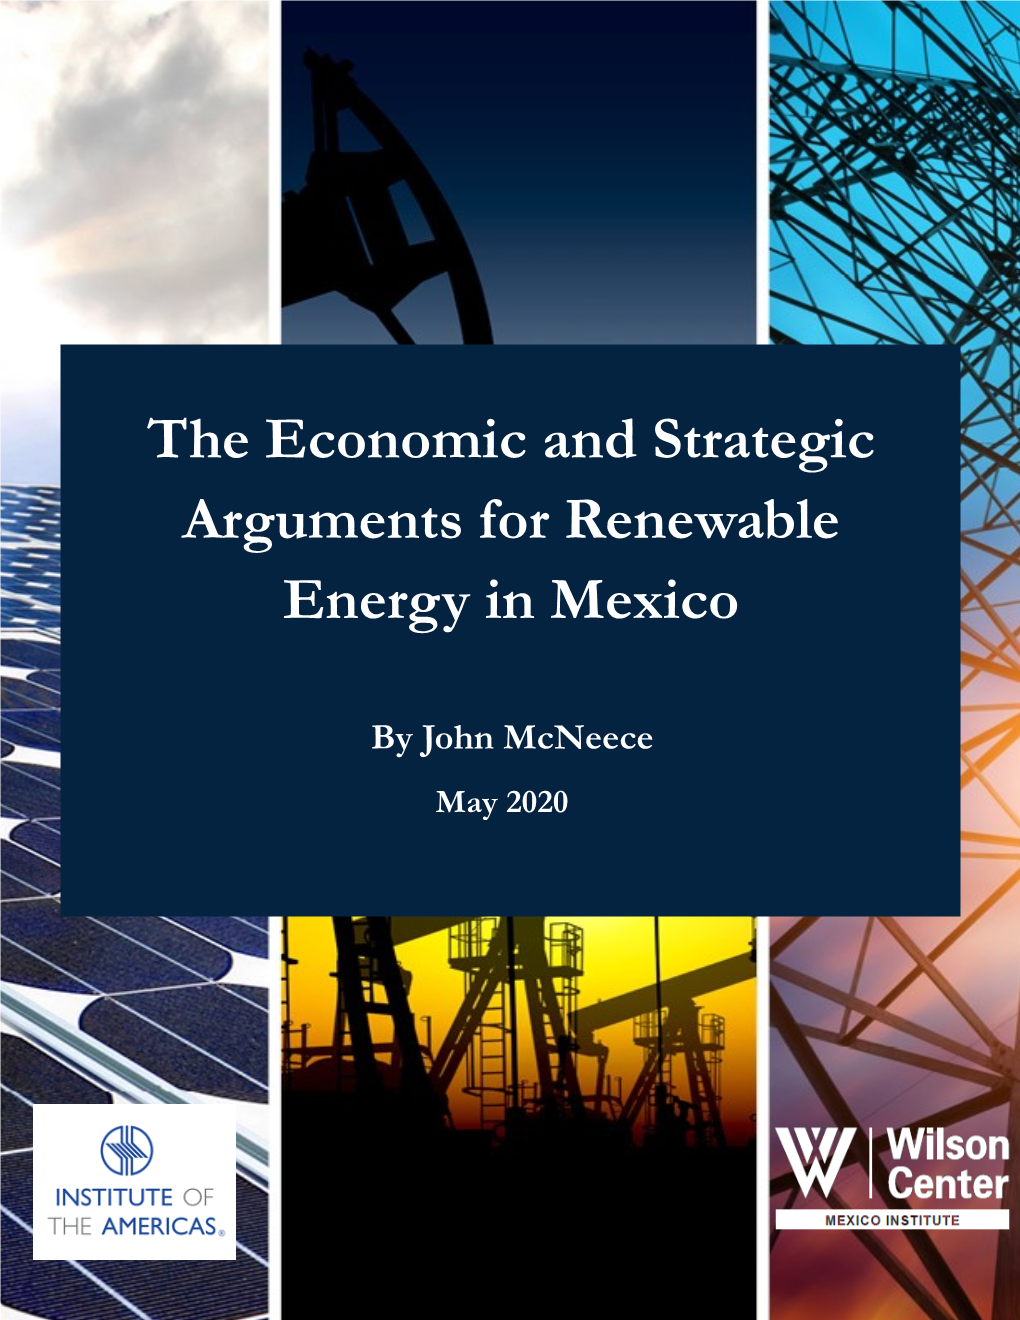 The Economic and Strategic Arguments for Renewable Energy in Mexico